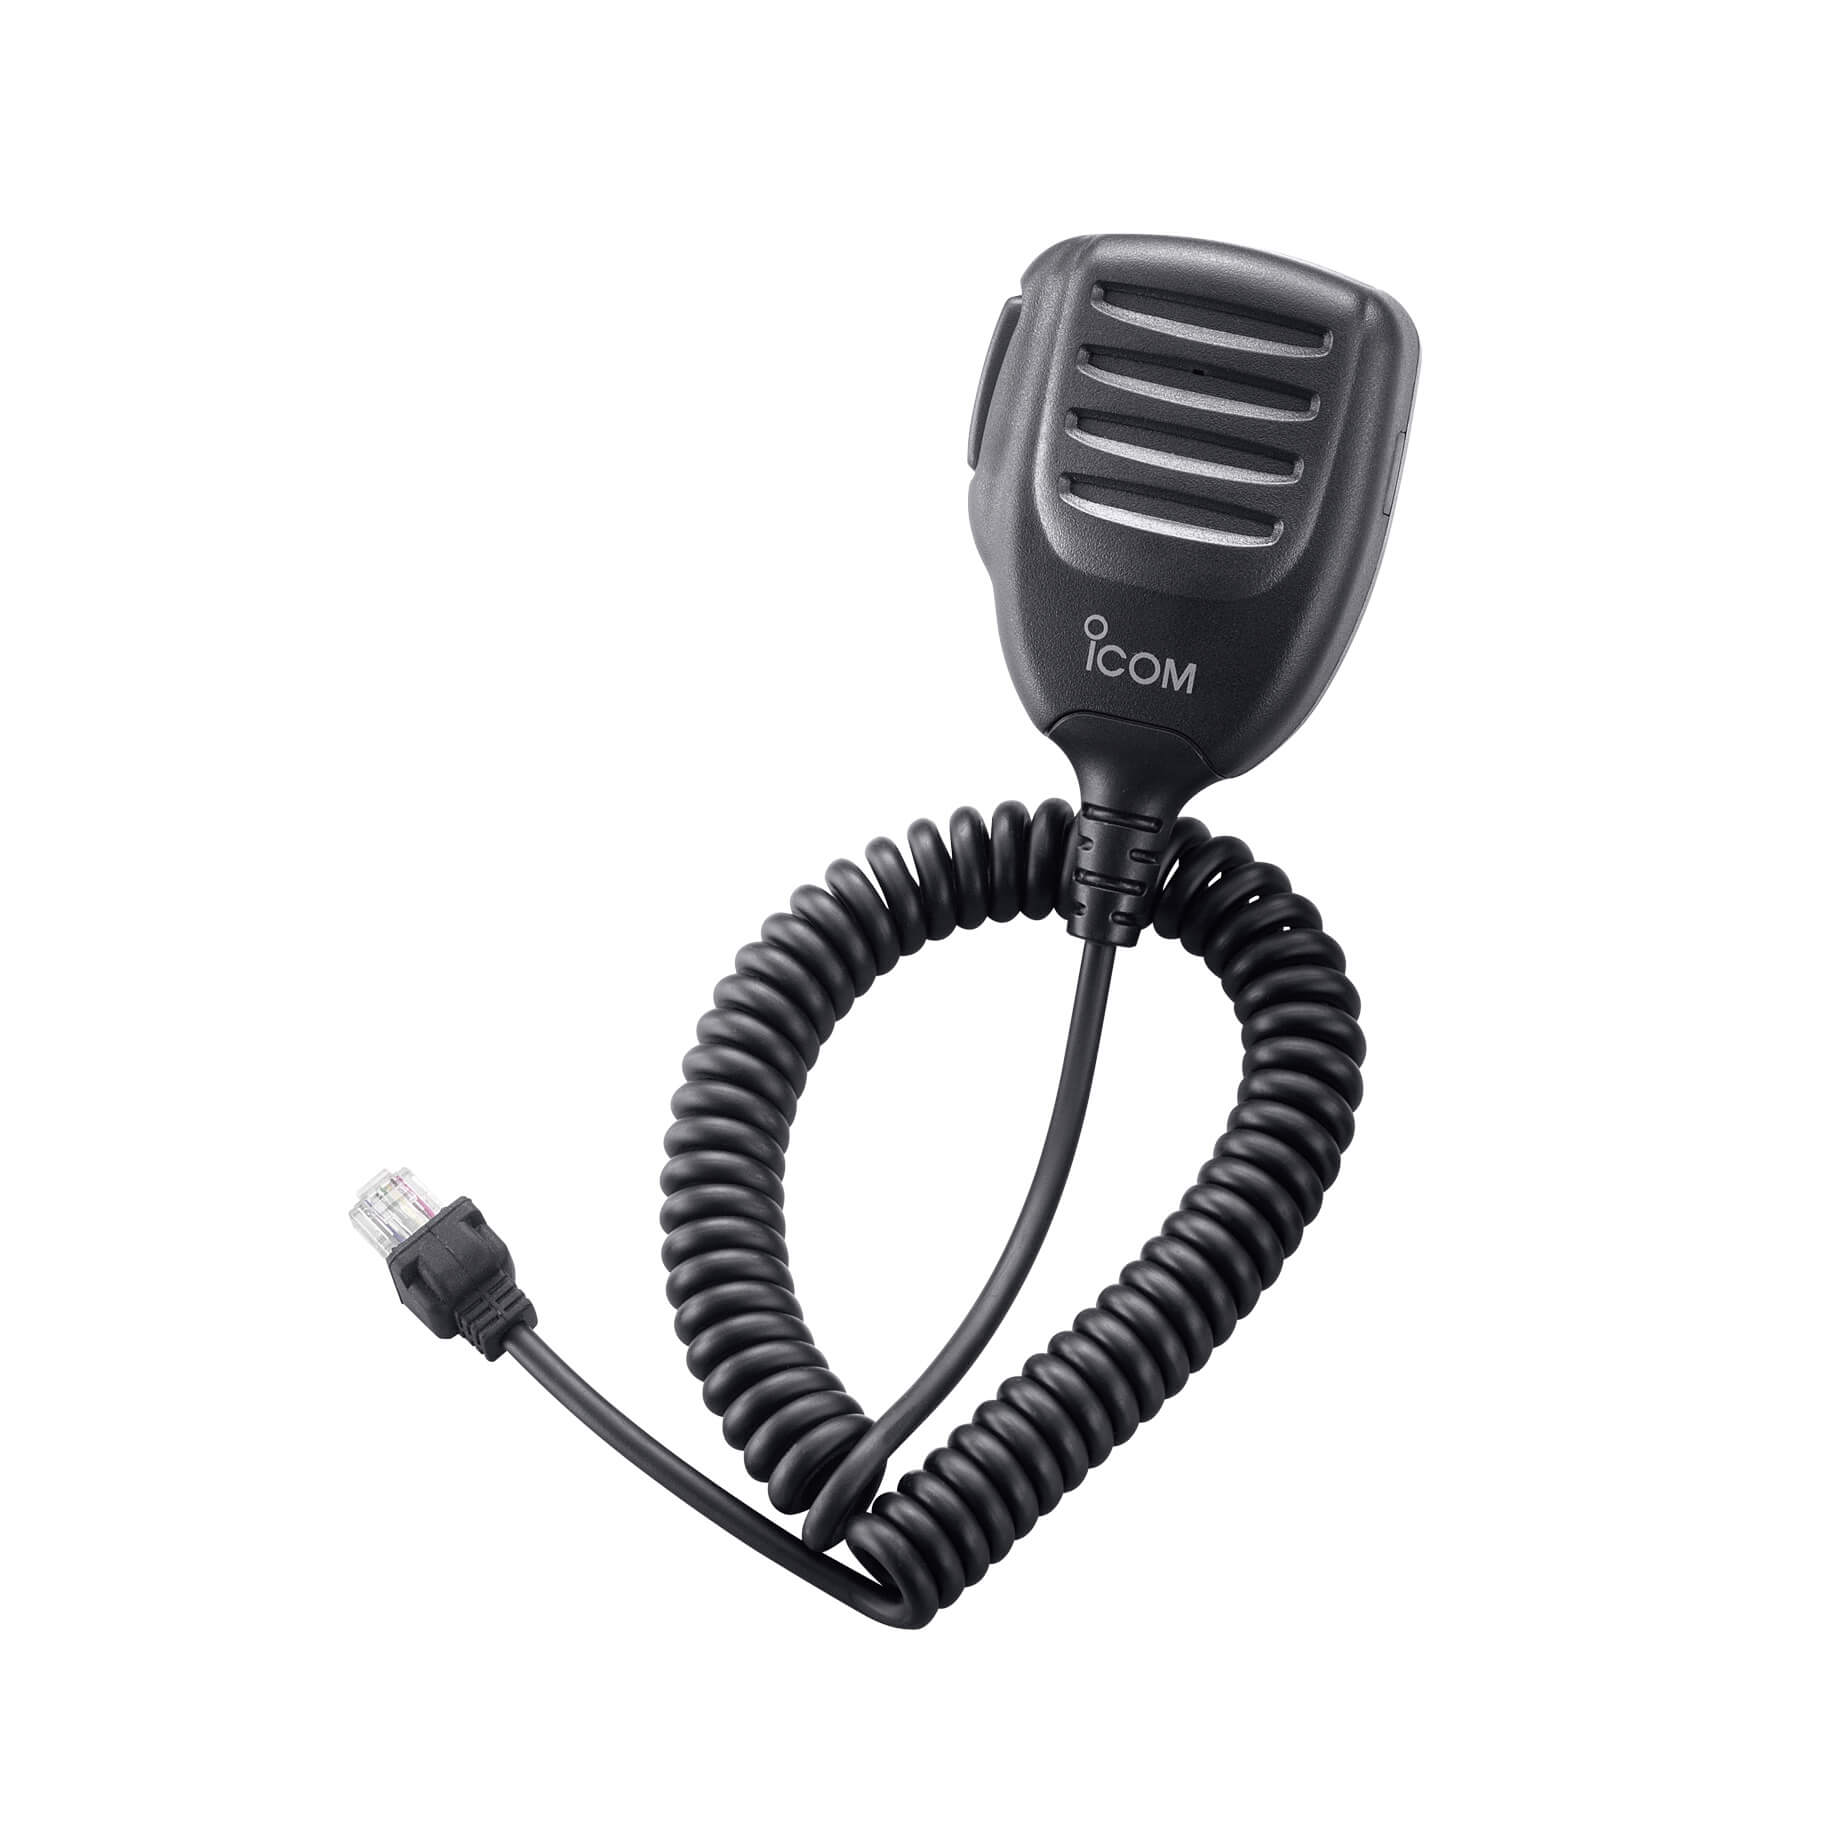 ICOM HM-211 handheld noise cancelling microphone for the IC-410PRO - D2N